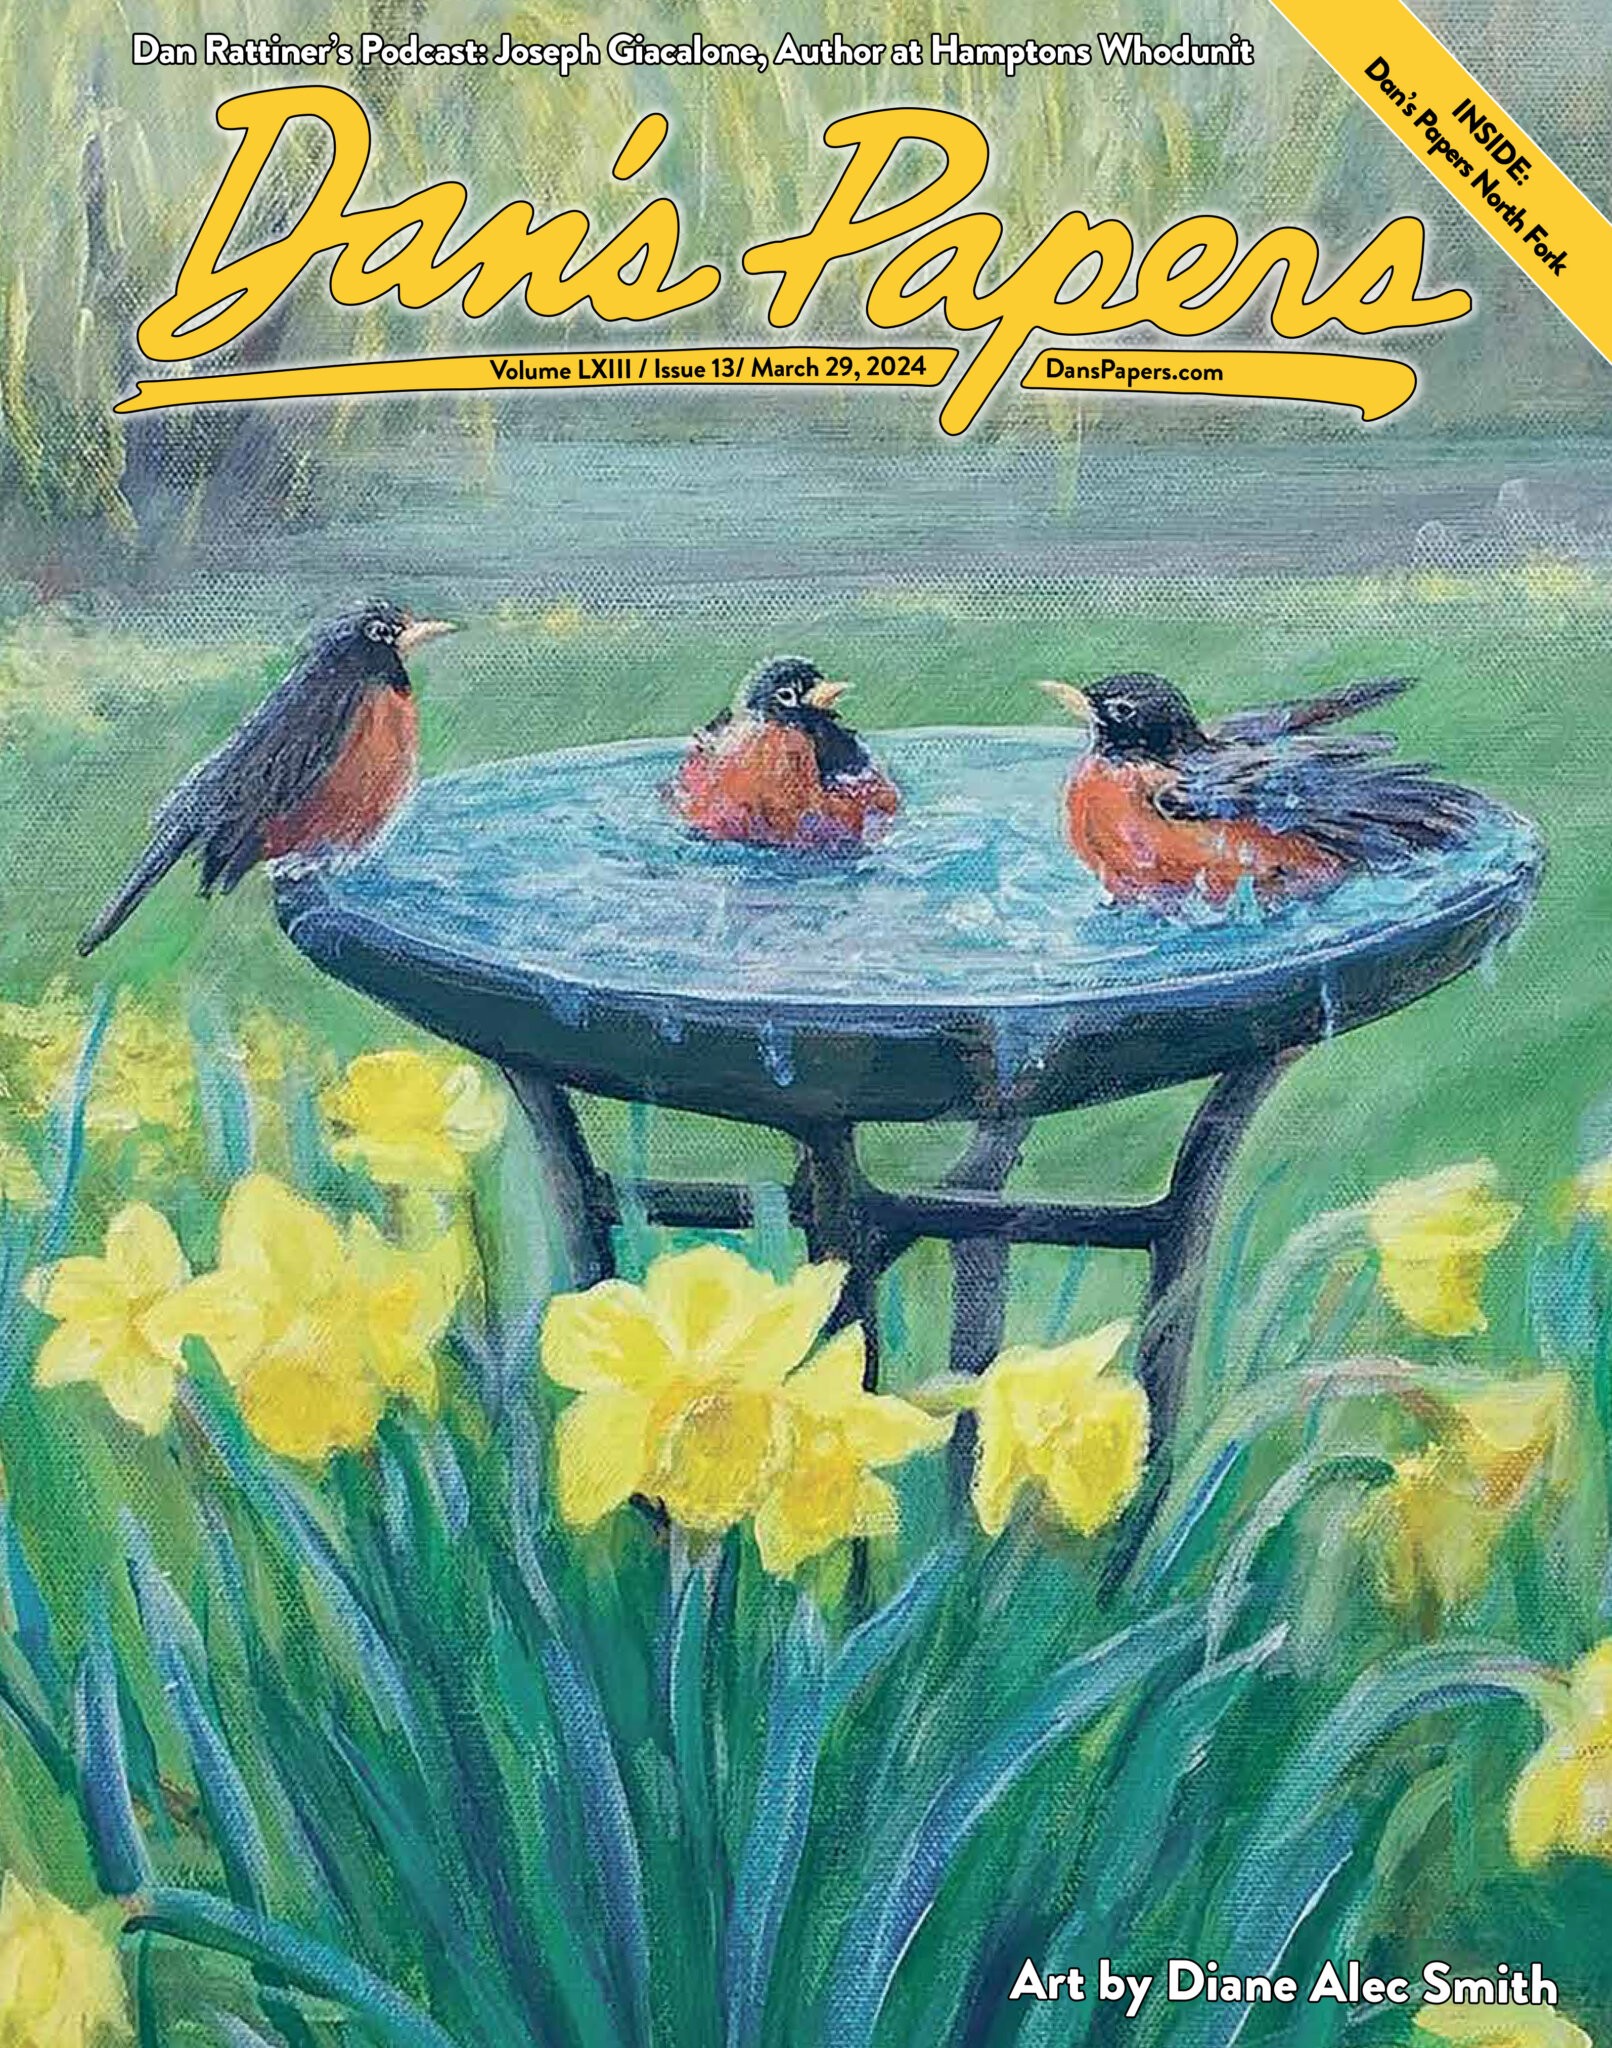 March 29, 2024 Dan's Papers cover art by Diane Alec Smith